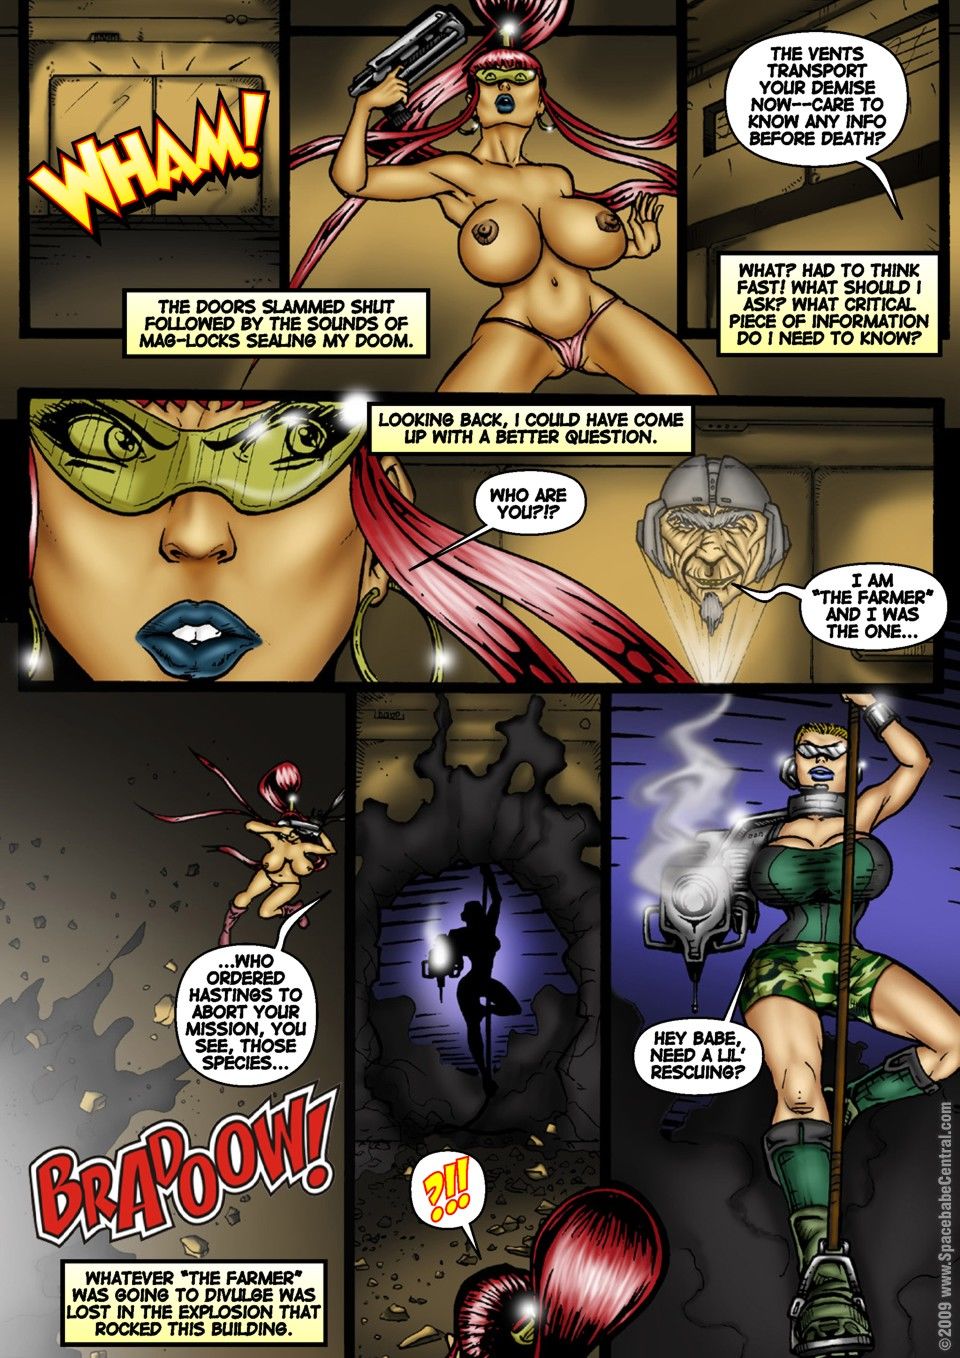 Alien Huntress 16-20 - Spacebabe Central page 12